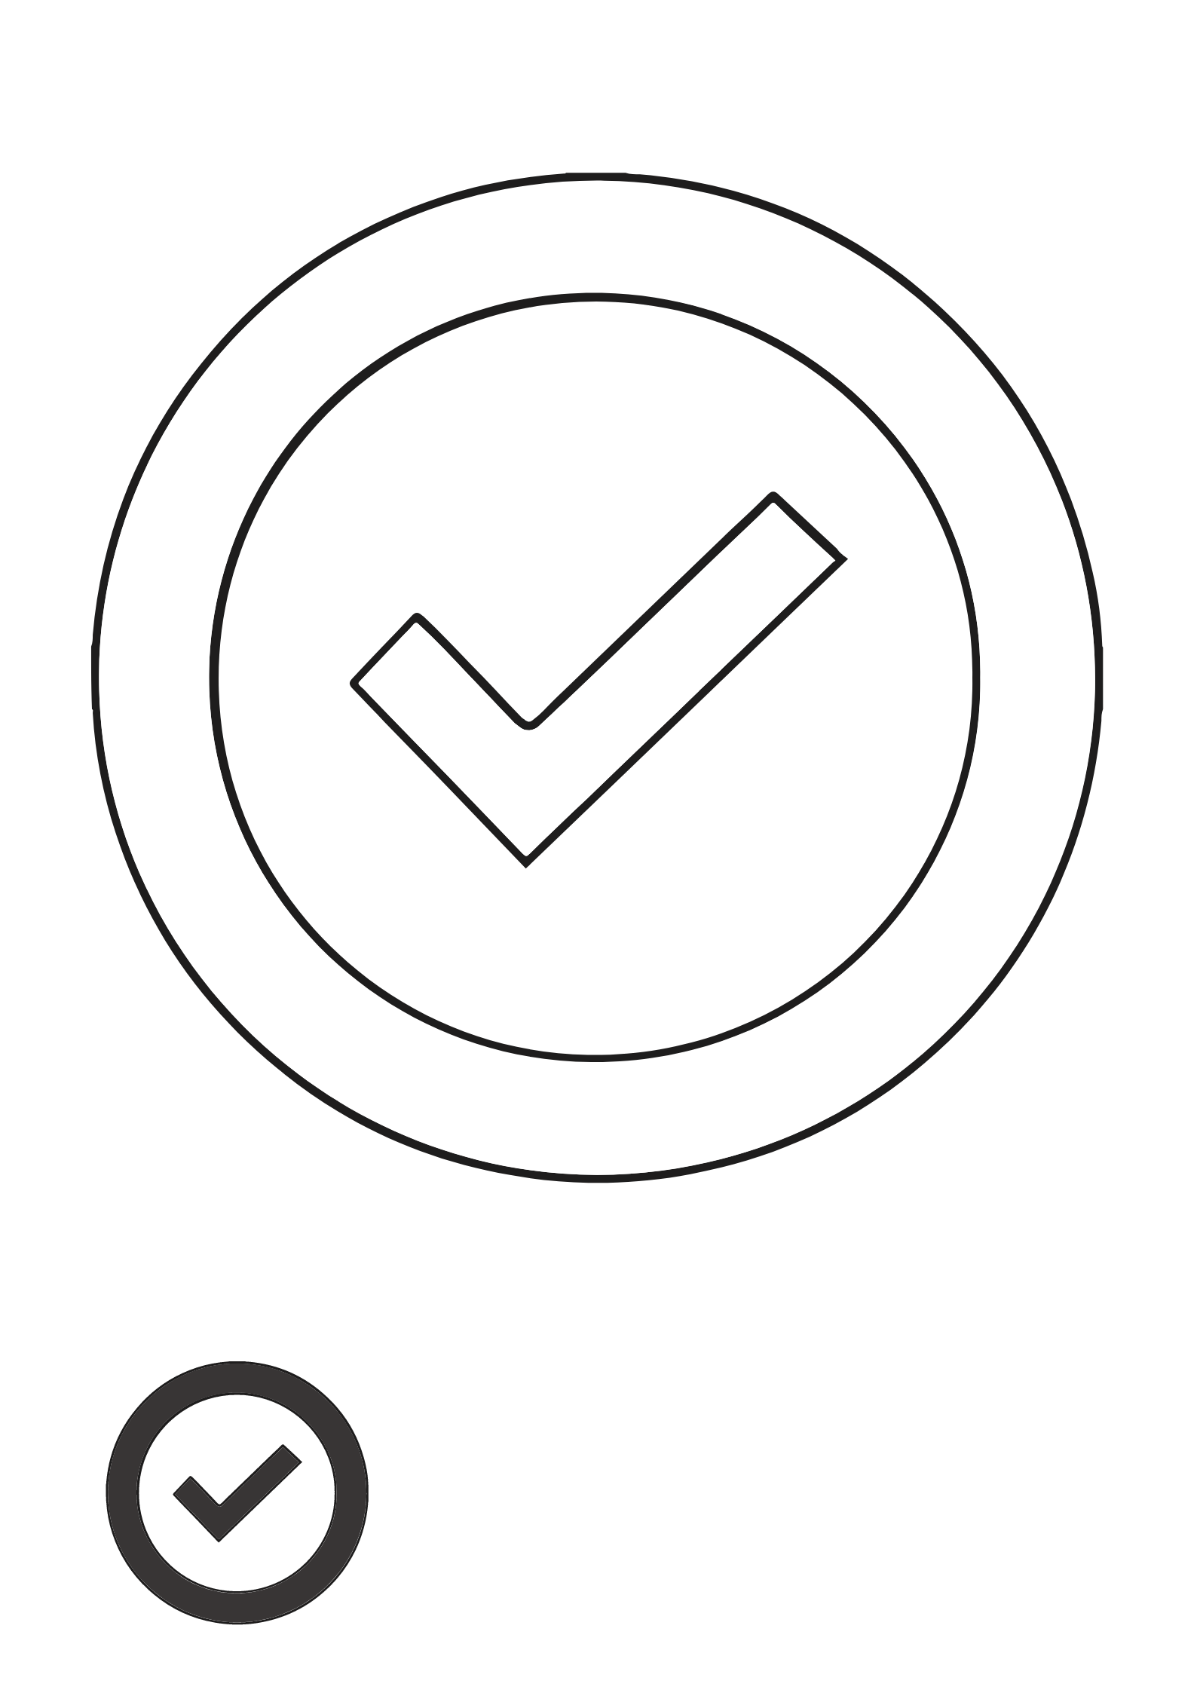 Checkmark Icon Coloring Page Template